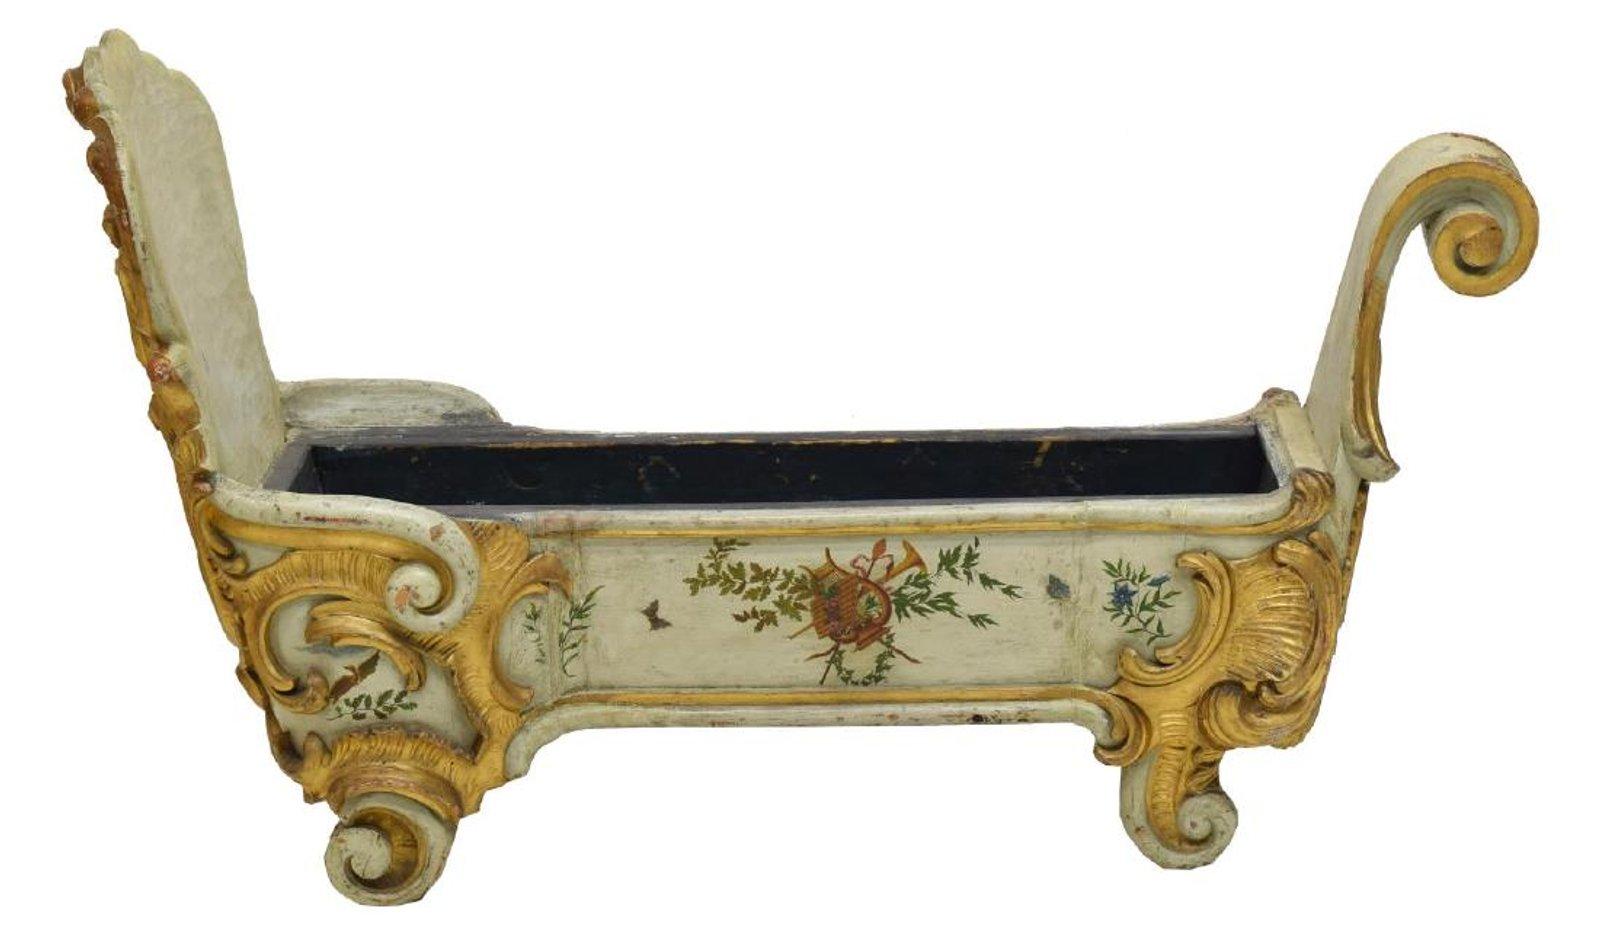 Unique 19th century Italian Venetian hand painted and parcel-gilt planter.
The front of the planter begins with a large scroll over gilt rocaille carving enclosing hand-painted foliage and flowers. The sides of the planter depict floral and foliage